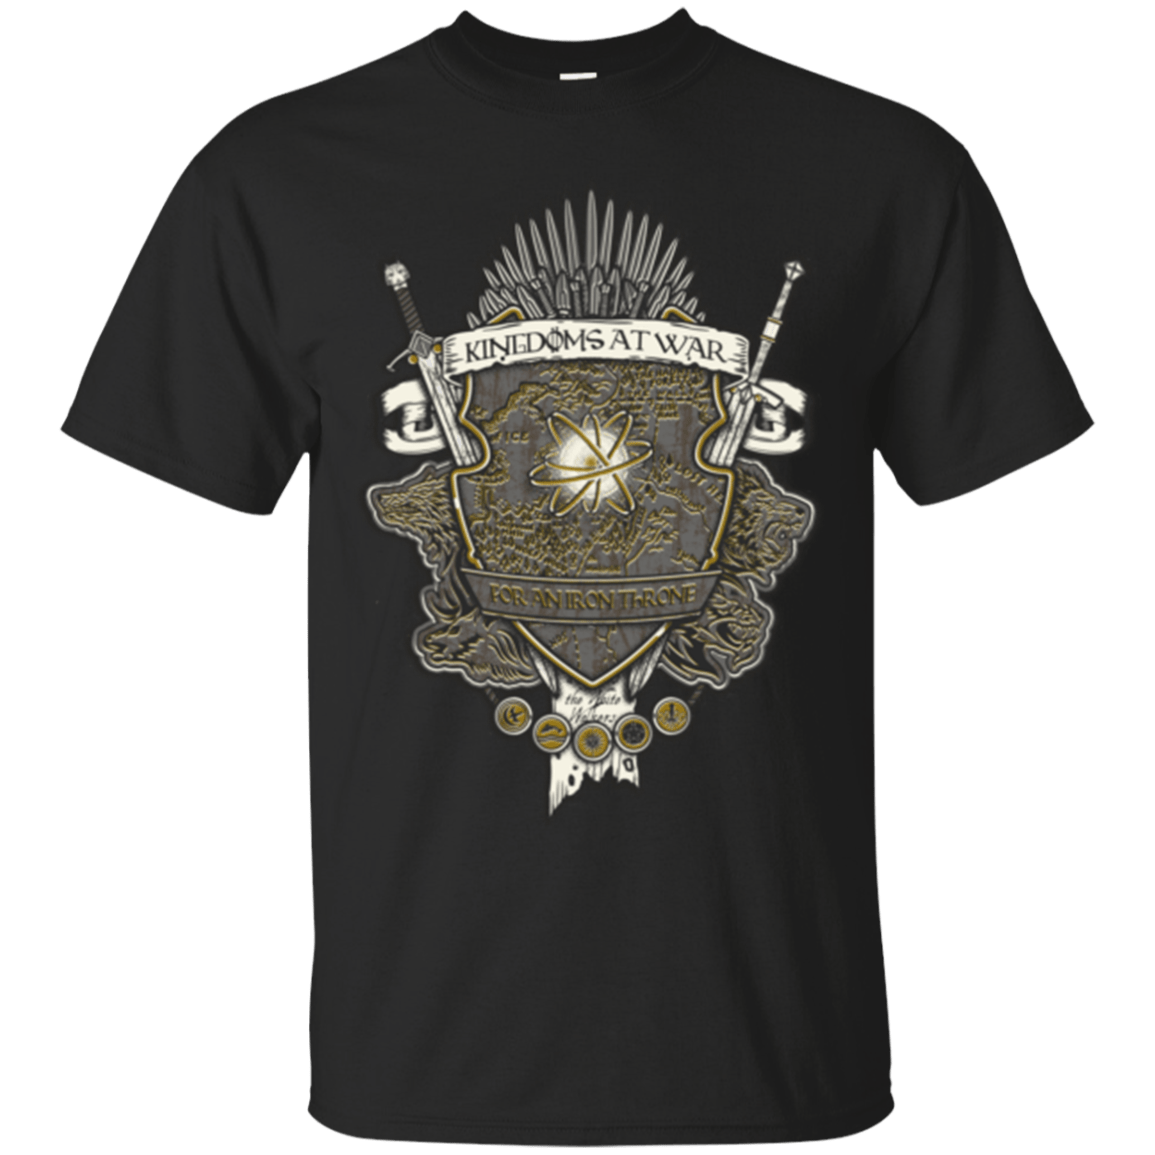 T-Shirts Black / Small Crest of Thrones T-Shirt